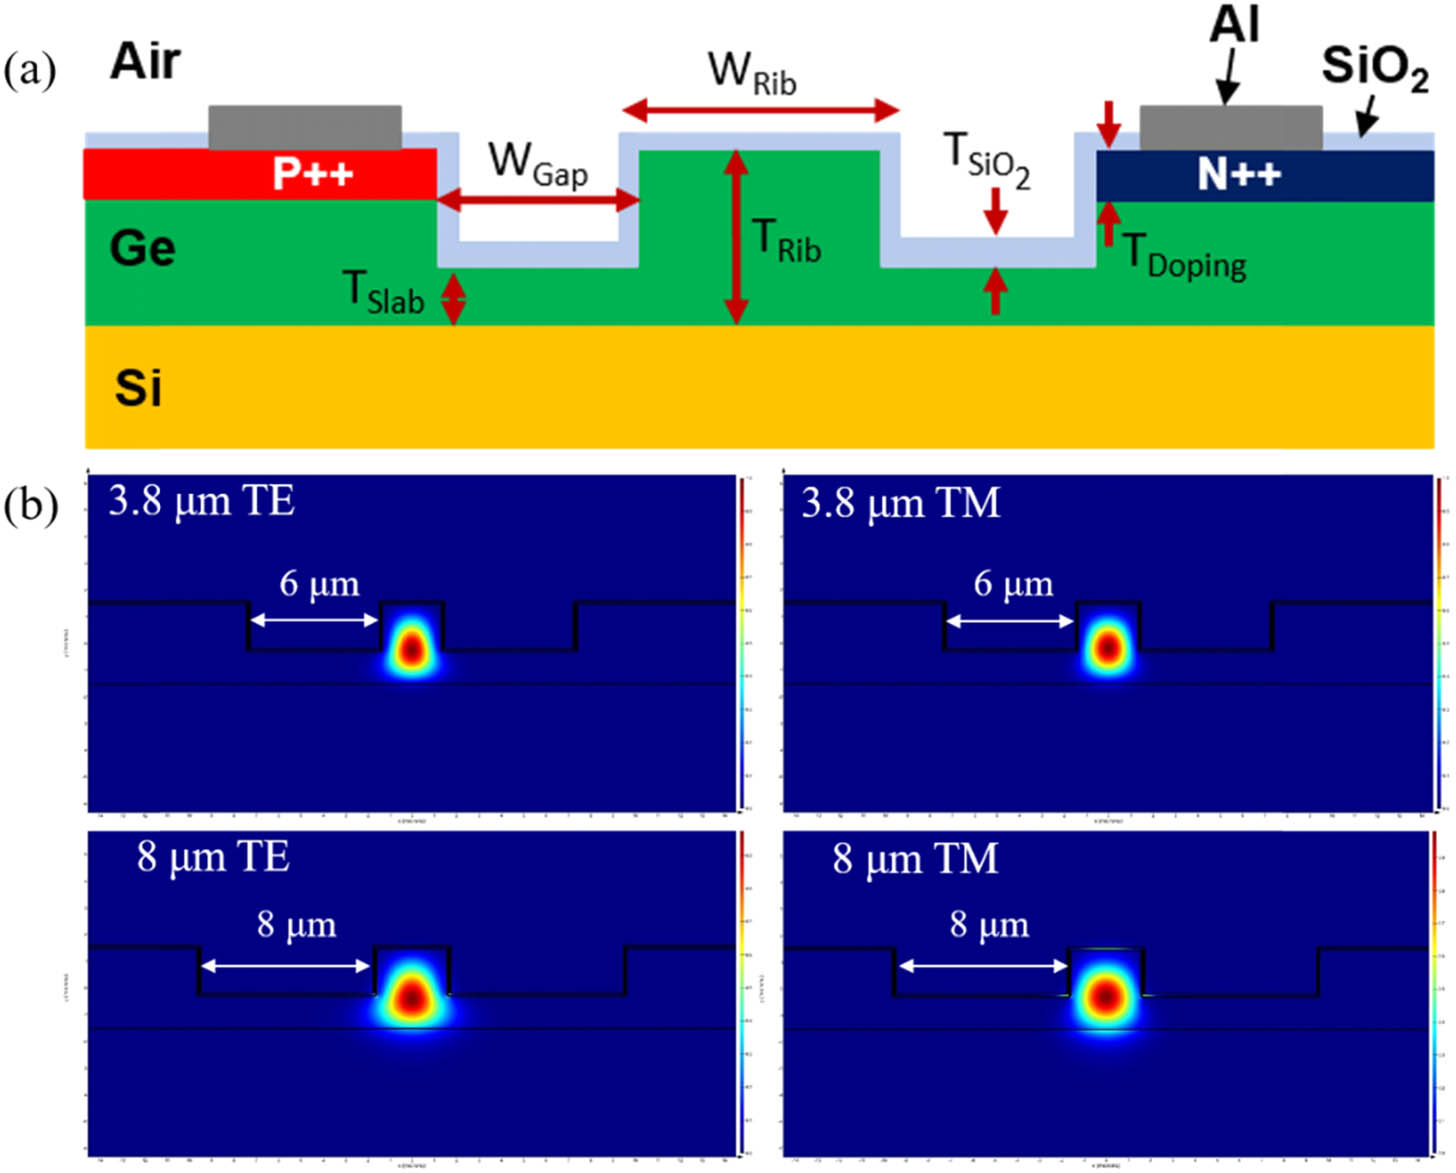 (a) Schematic of the PIN junction modulator cross section. (b) The mode profiles for Ge-on-Si rib waveguides at 3.8 and 8 μm wavelengths, modeled using Lumerical Mode Solutions.